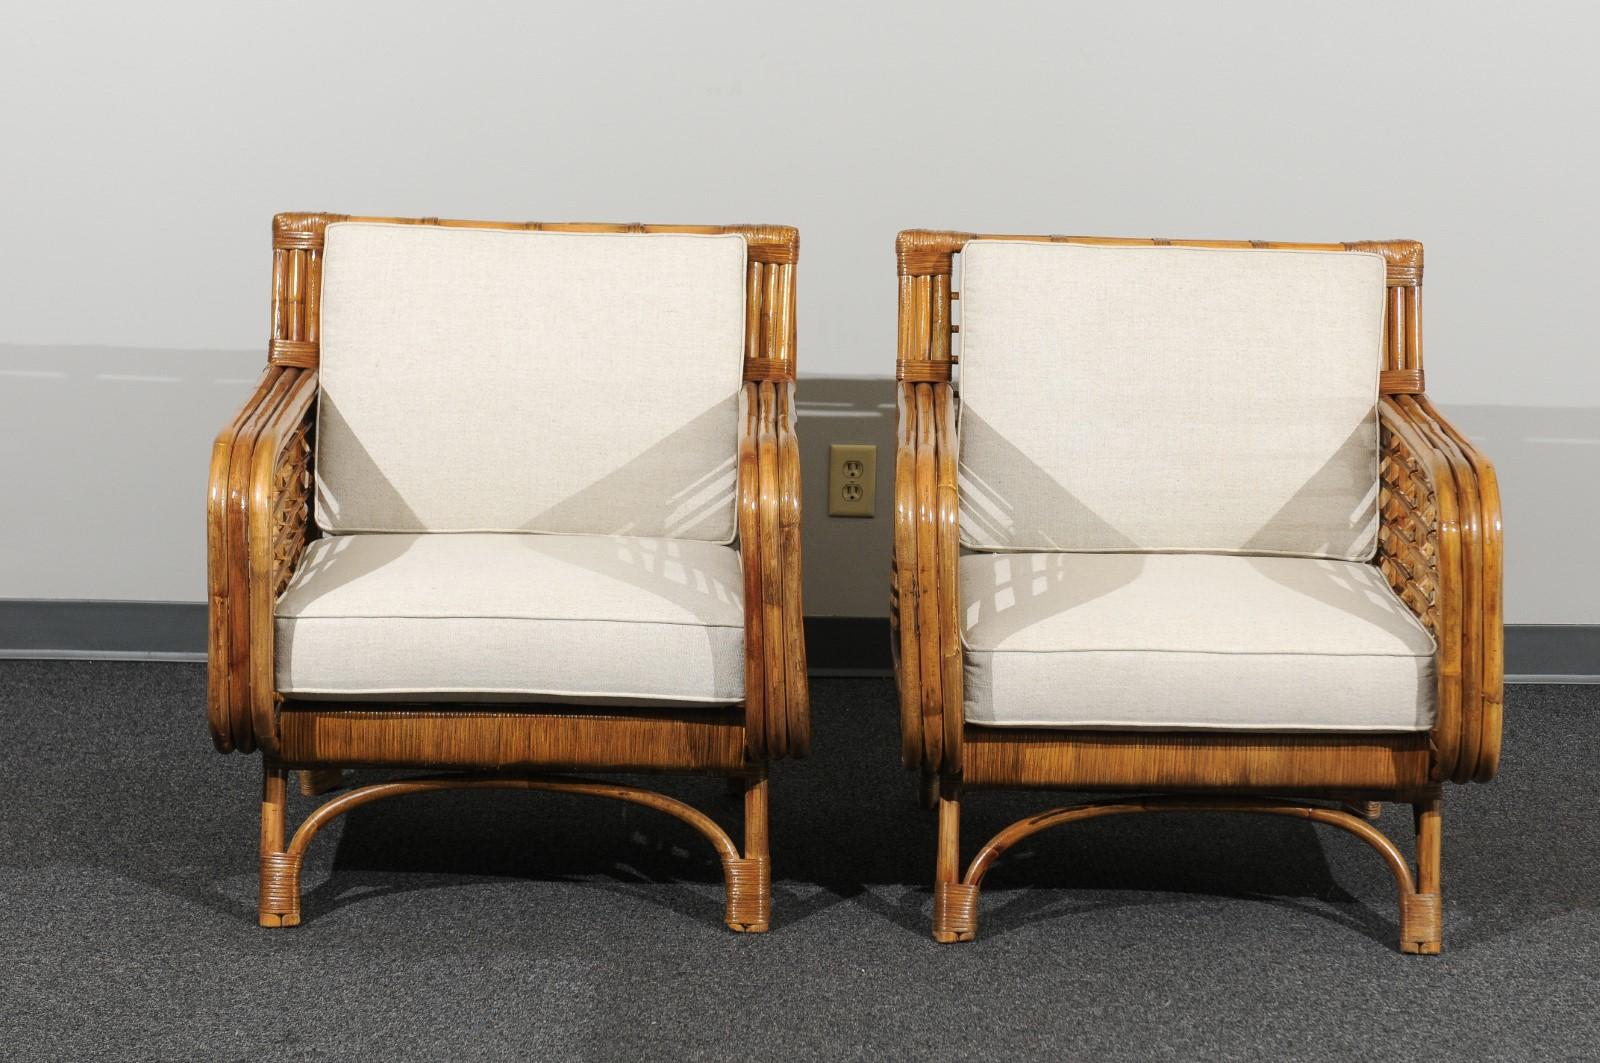 Set of 4 Fabulous Restored Birdcage Style Rattan and Cane Loungers, circa 1955 For Sale 6